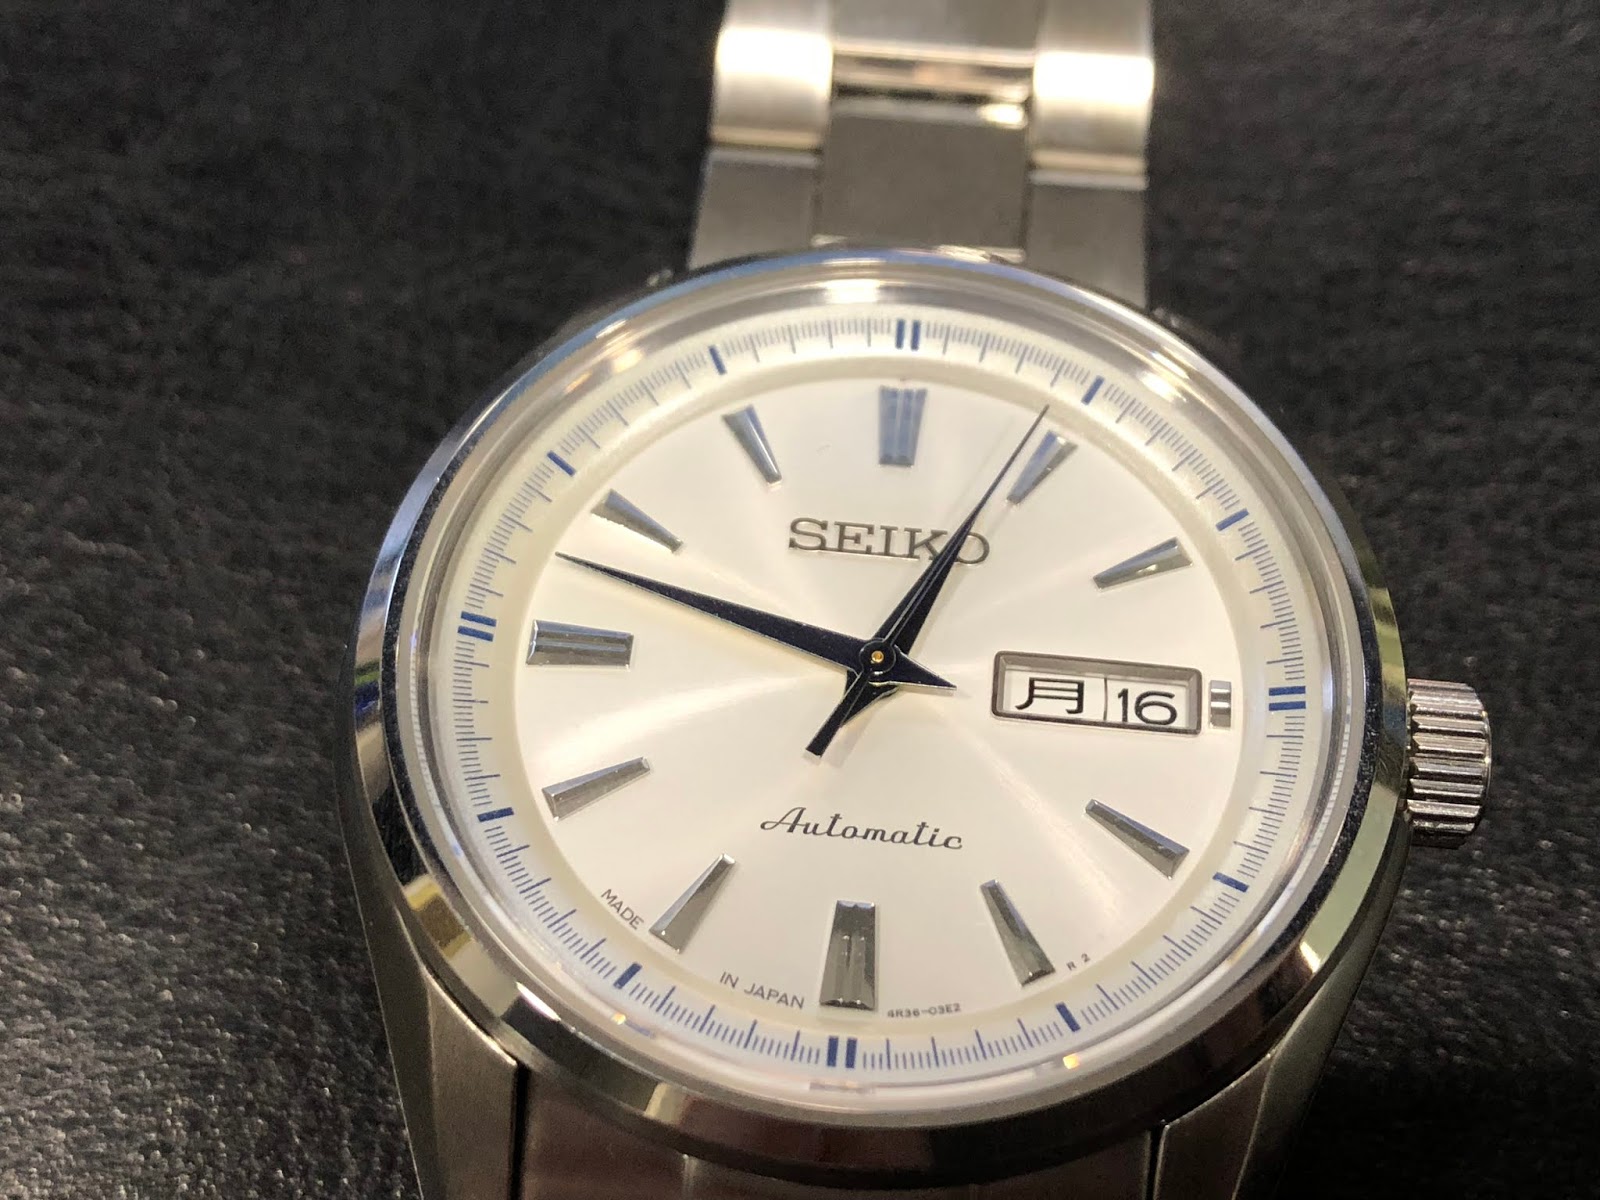 My Eastern Watch Collection: SEIKO Automatic Presage SARY055 (JDM  reference)/SRP527 (International reference) - Value For Money Dress Watch,  A Review (plus Video)